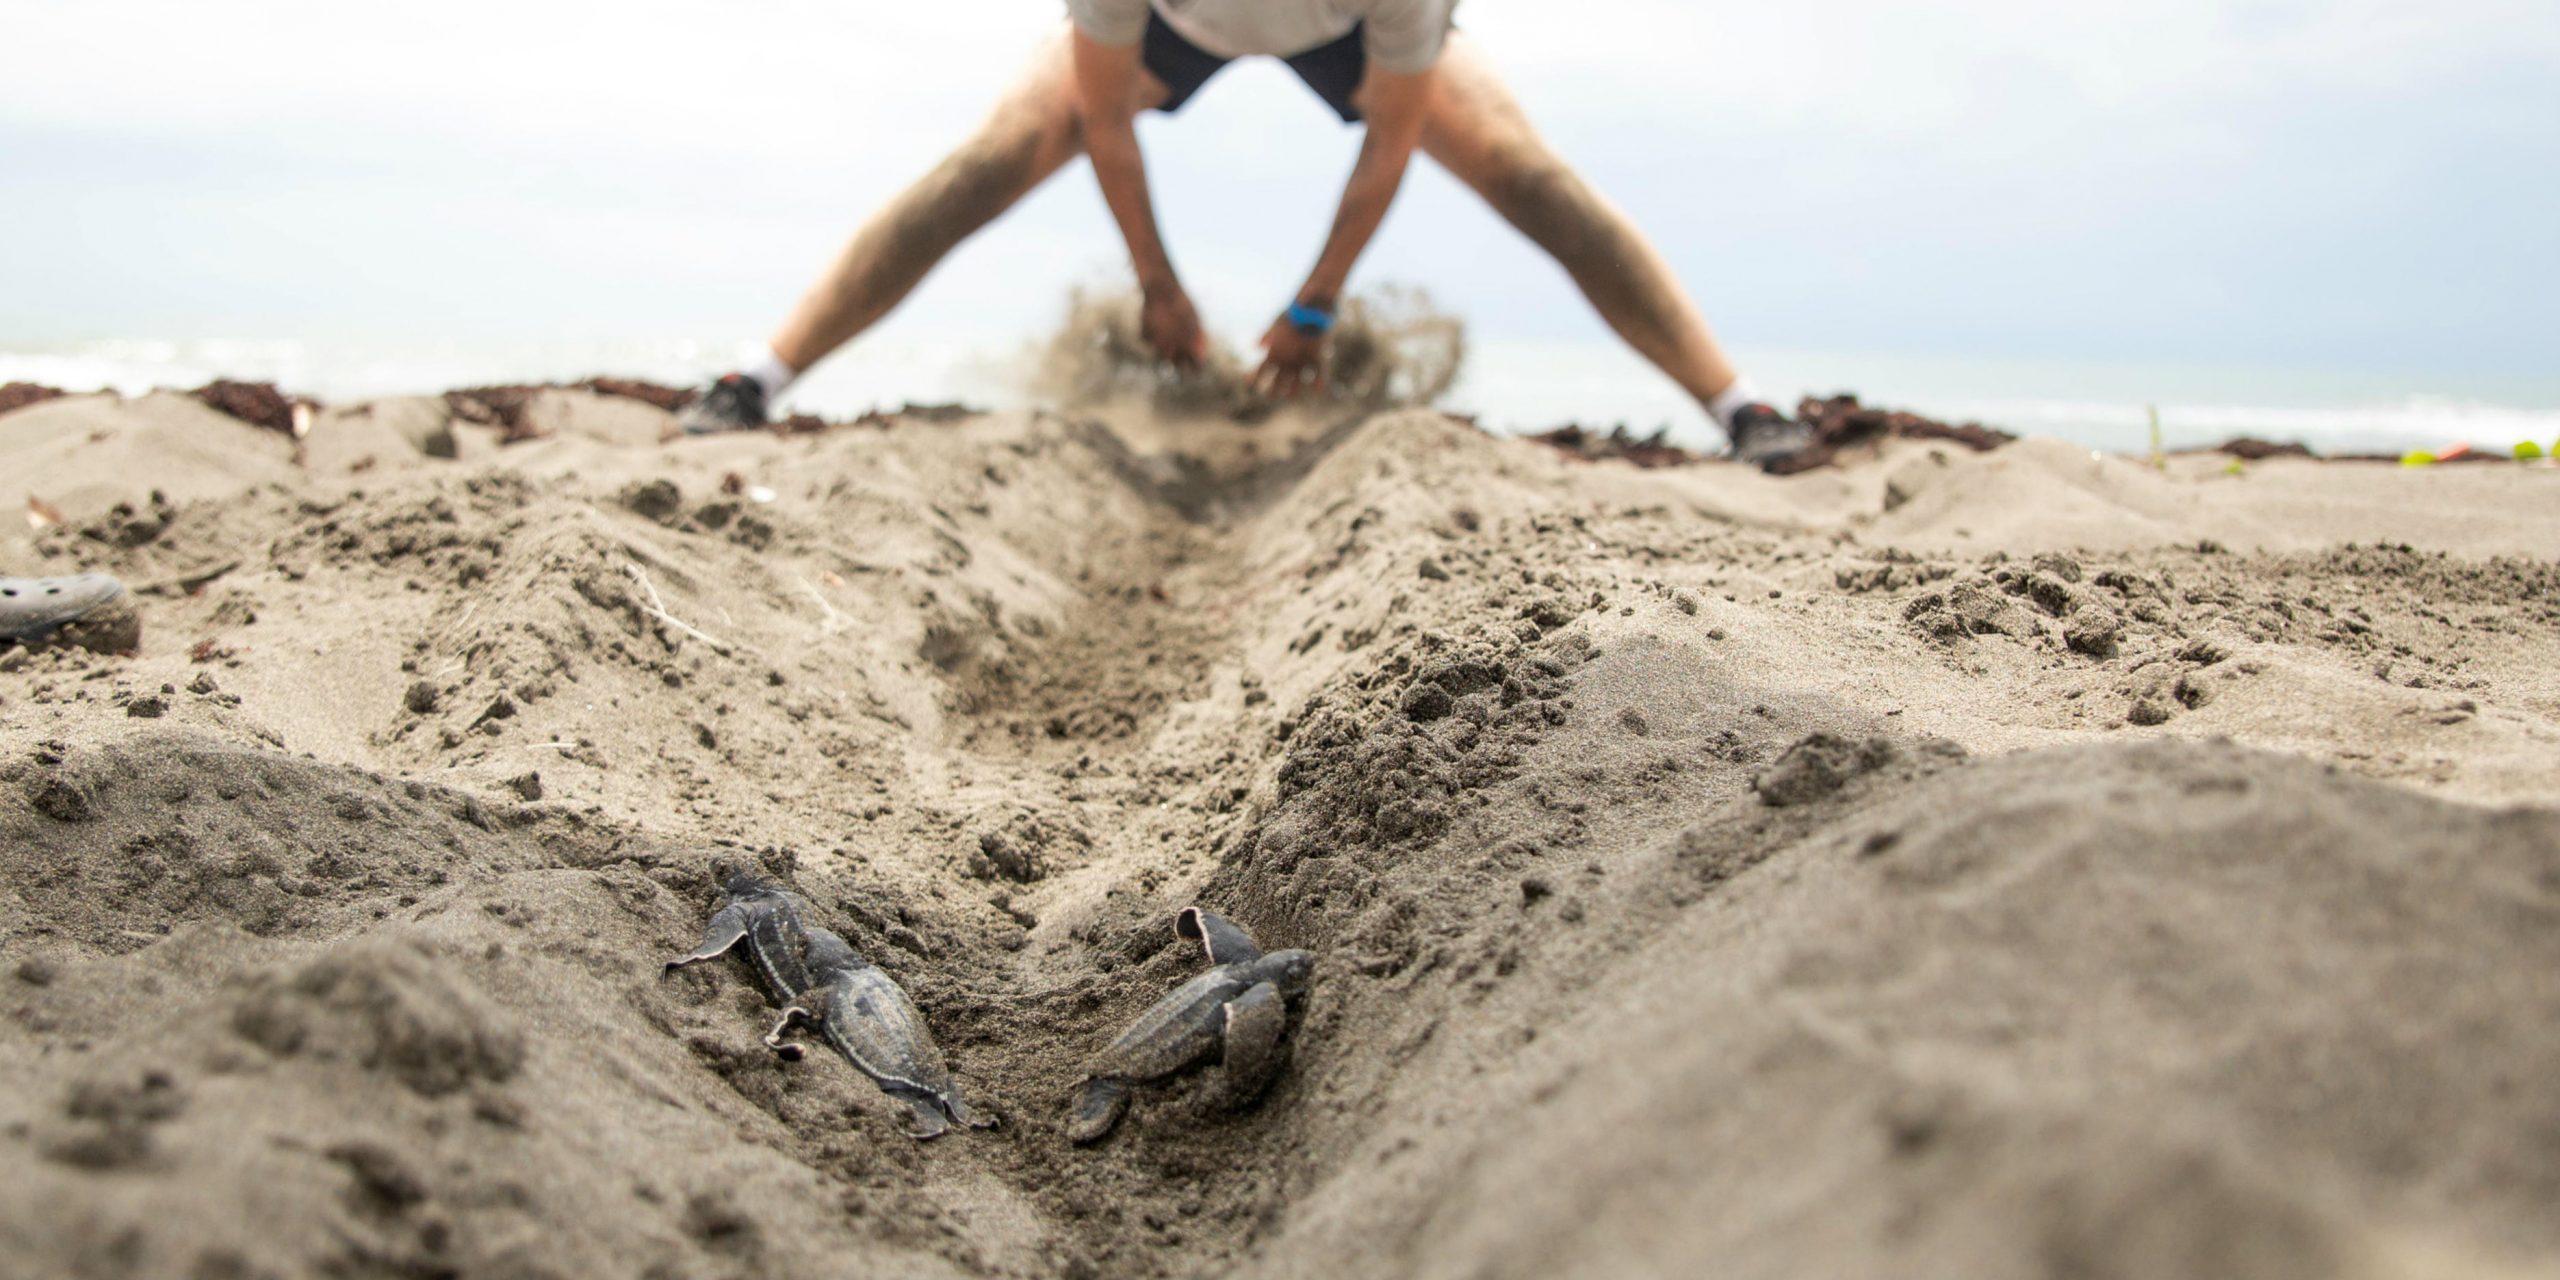 a marine conservation volunteer clears the path for a baby sea turtle